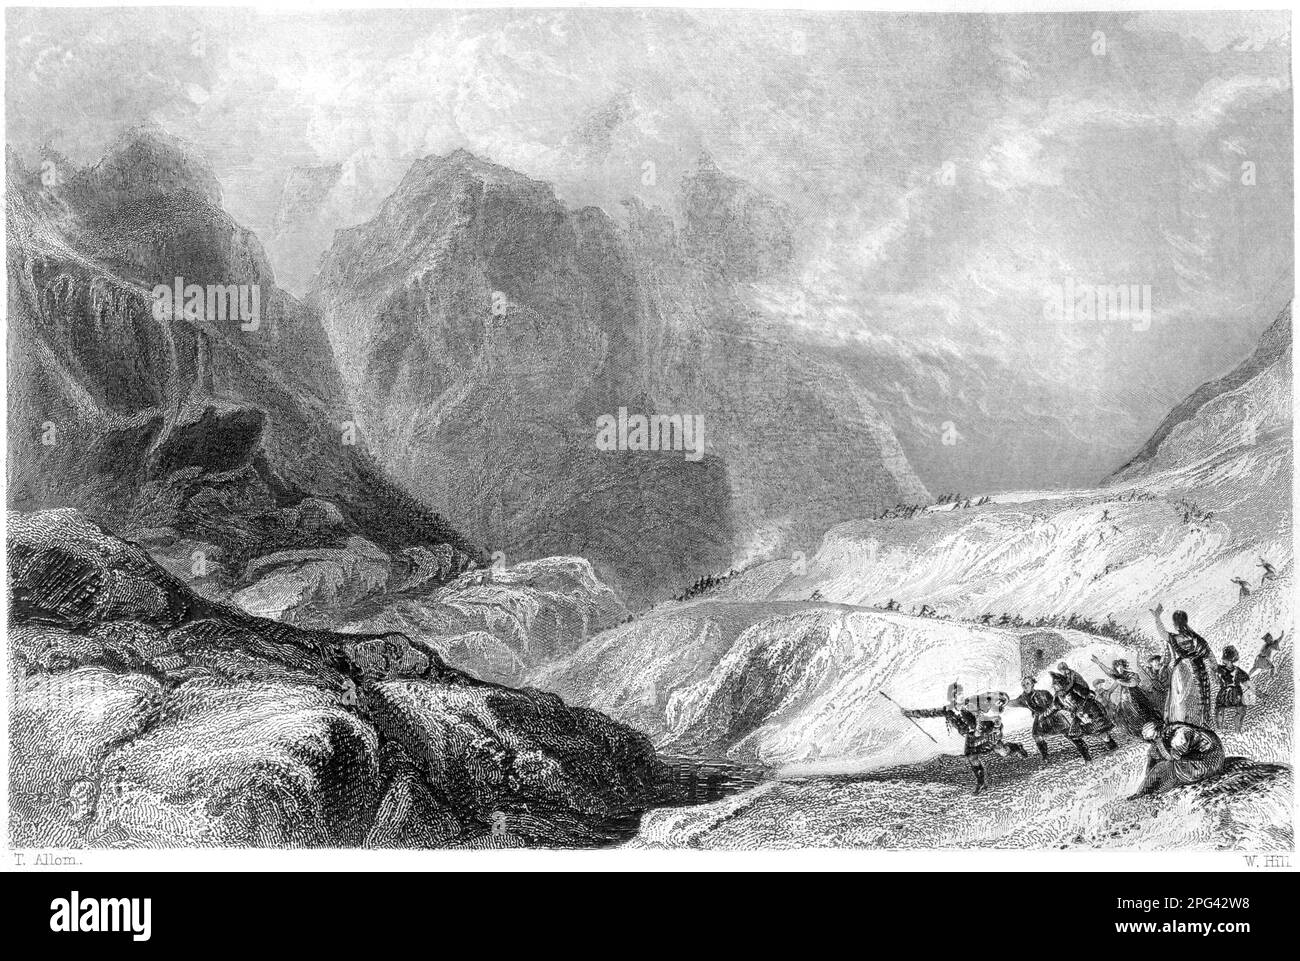 An engraving of The Eastern Pass of Glencoe, Argyleshire, Scotland UK scanned at high resolution from a book printed in 1840. Stock Photo